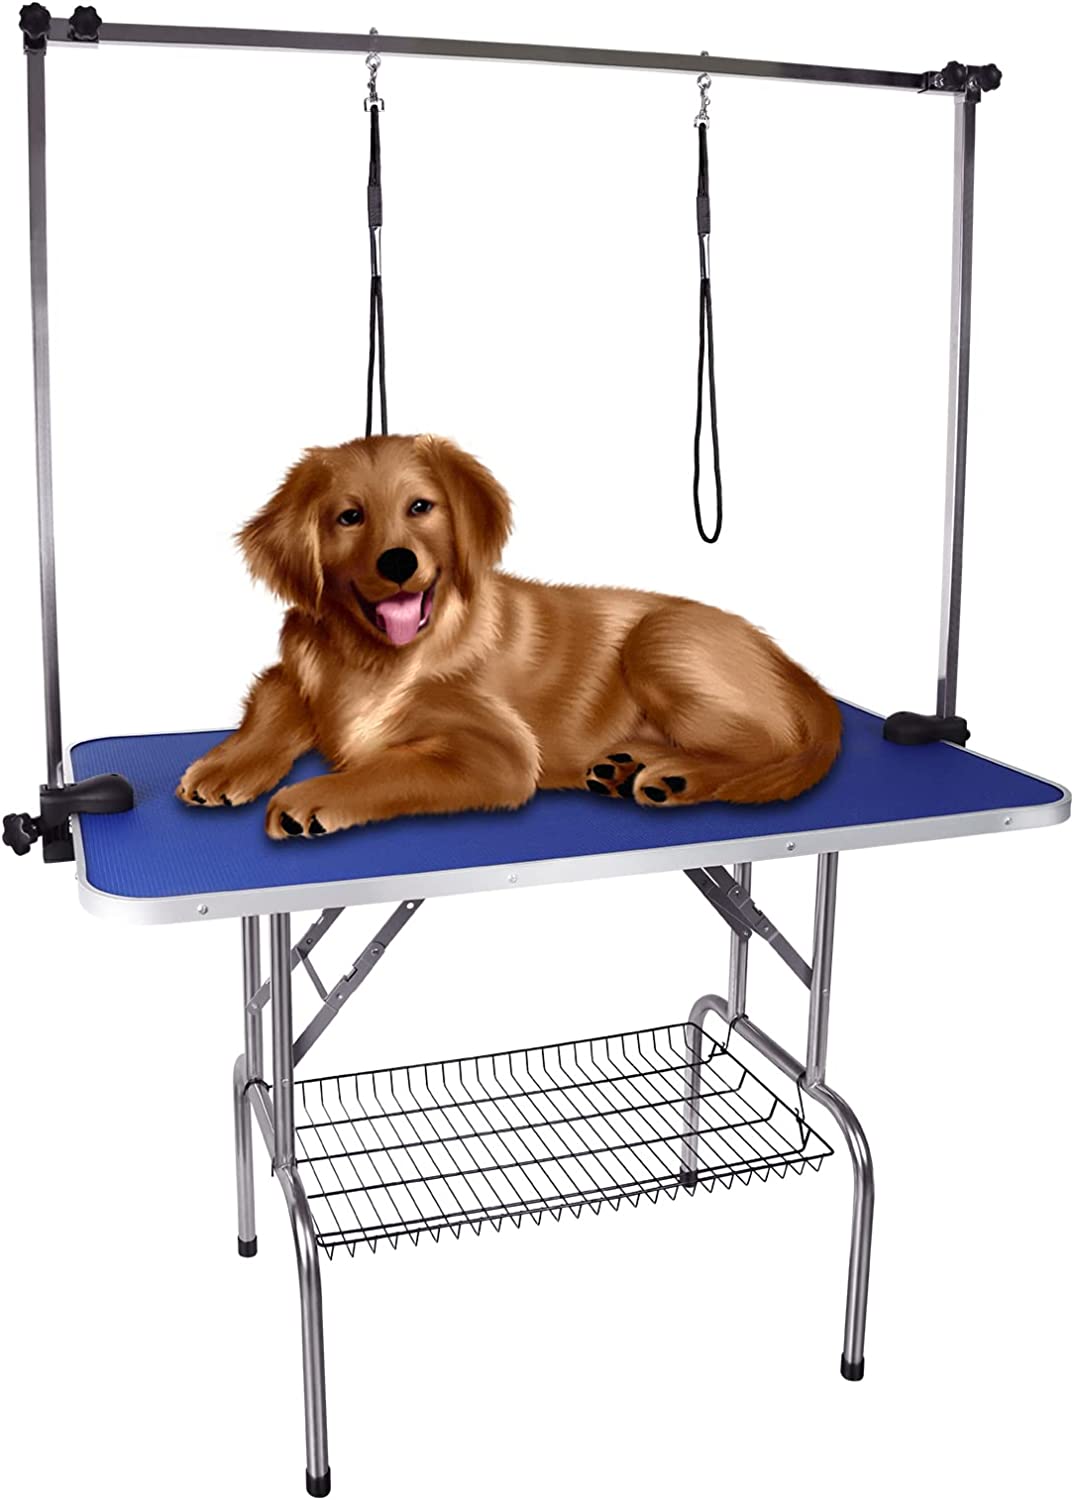 Pet Dog Grooming Table with Adjustable Height Arm I Foldable Heavy Duty Grooming Table I 45 x 24 Inch I Black